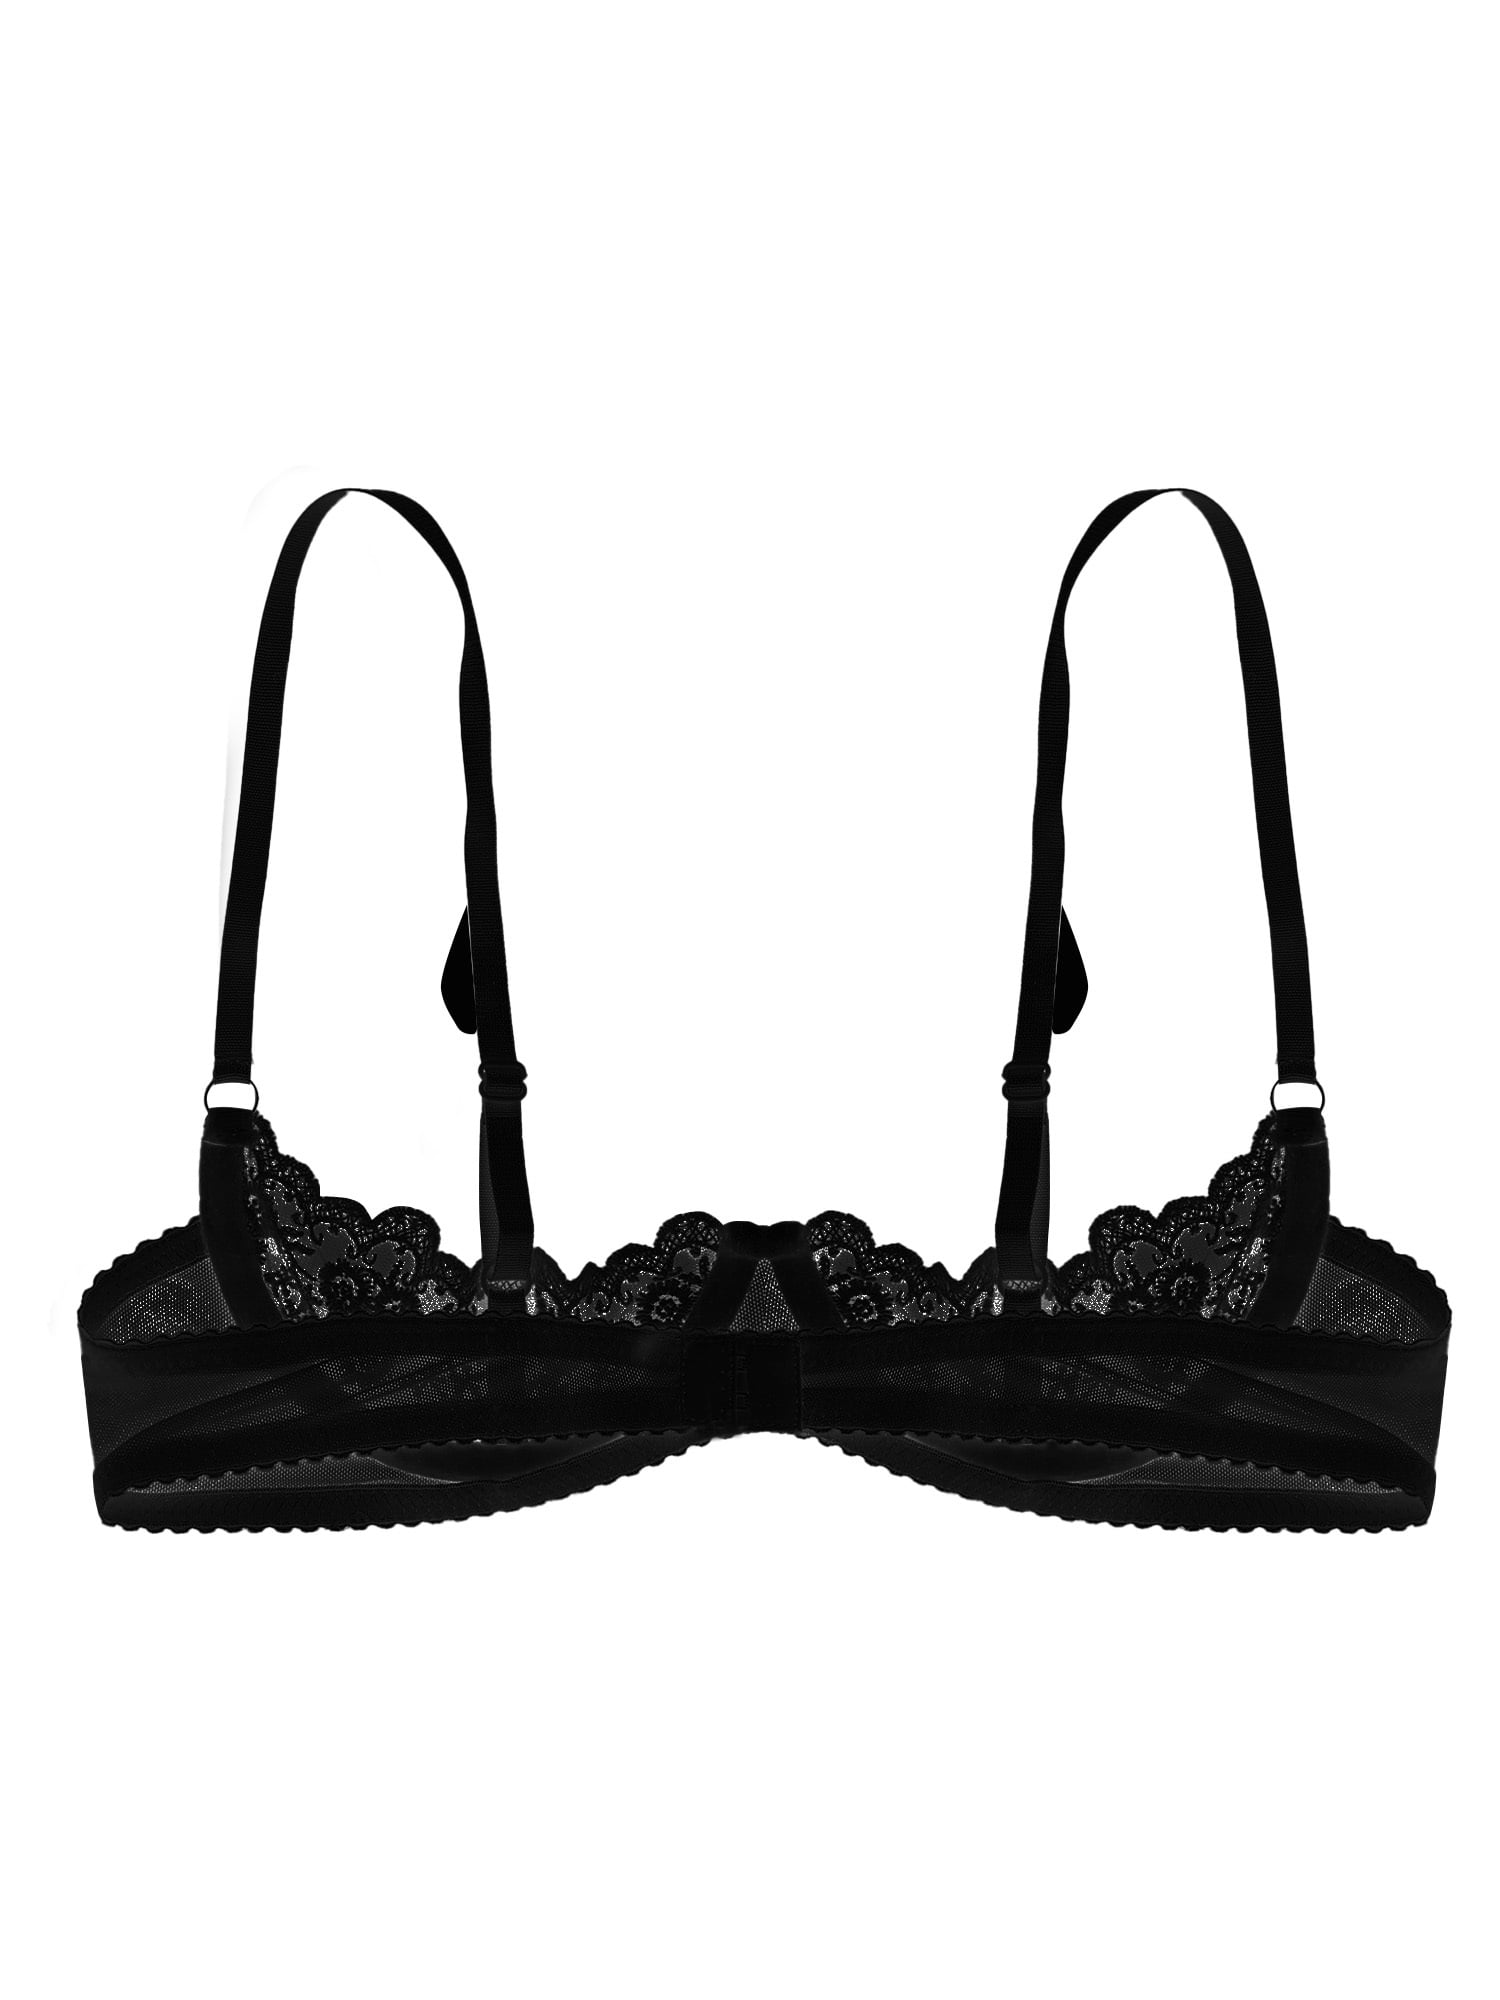 Sheer Luxe Balconette Underwire Push-up Bra Negro 34C by Ilusion